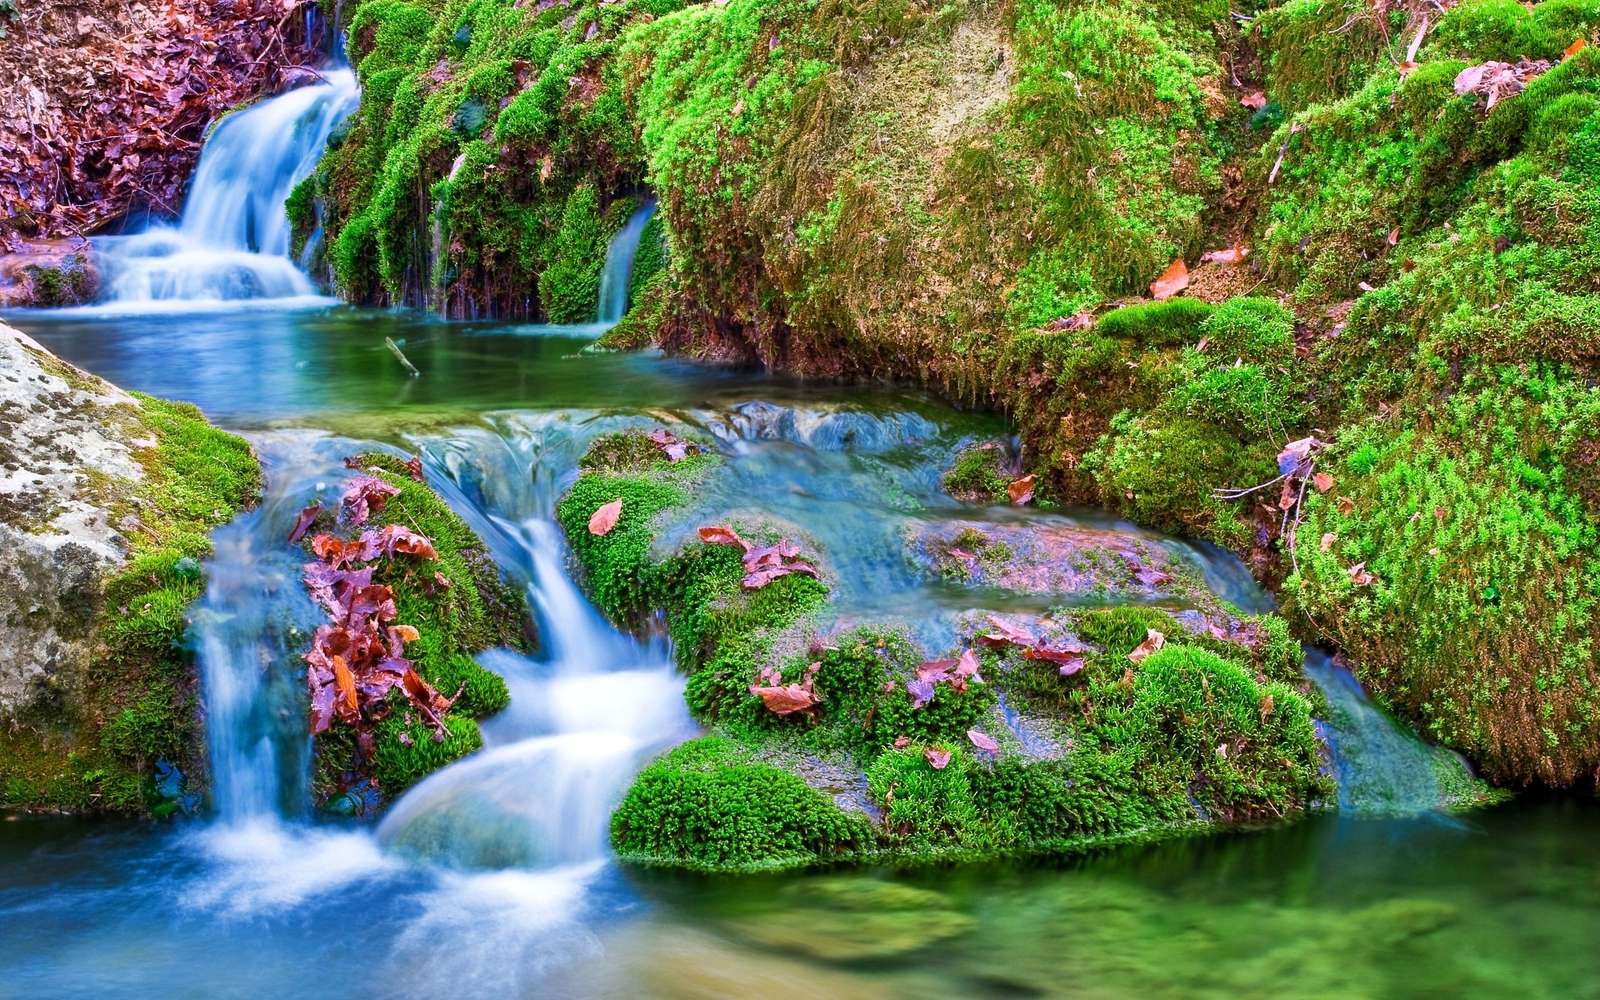 Green Moss and Water puzzle online from photo